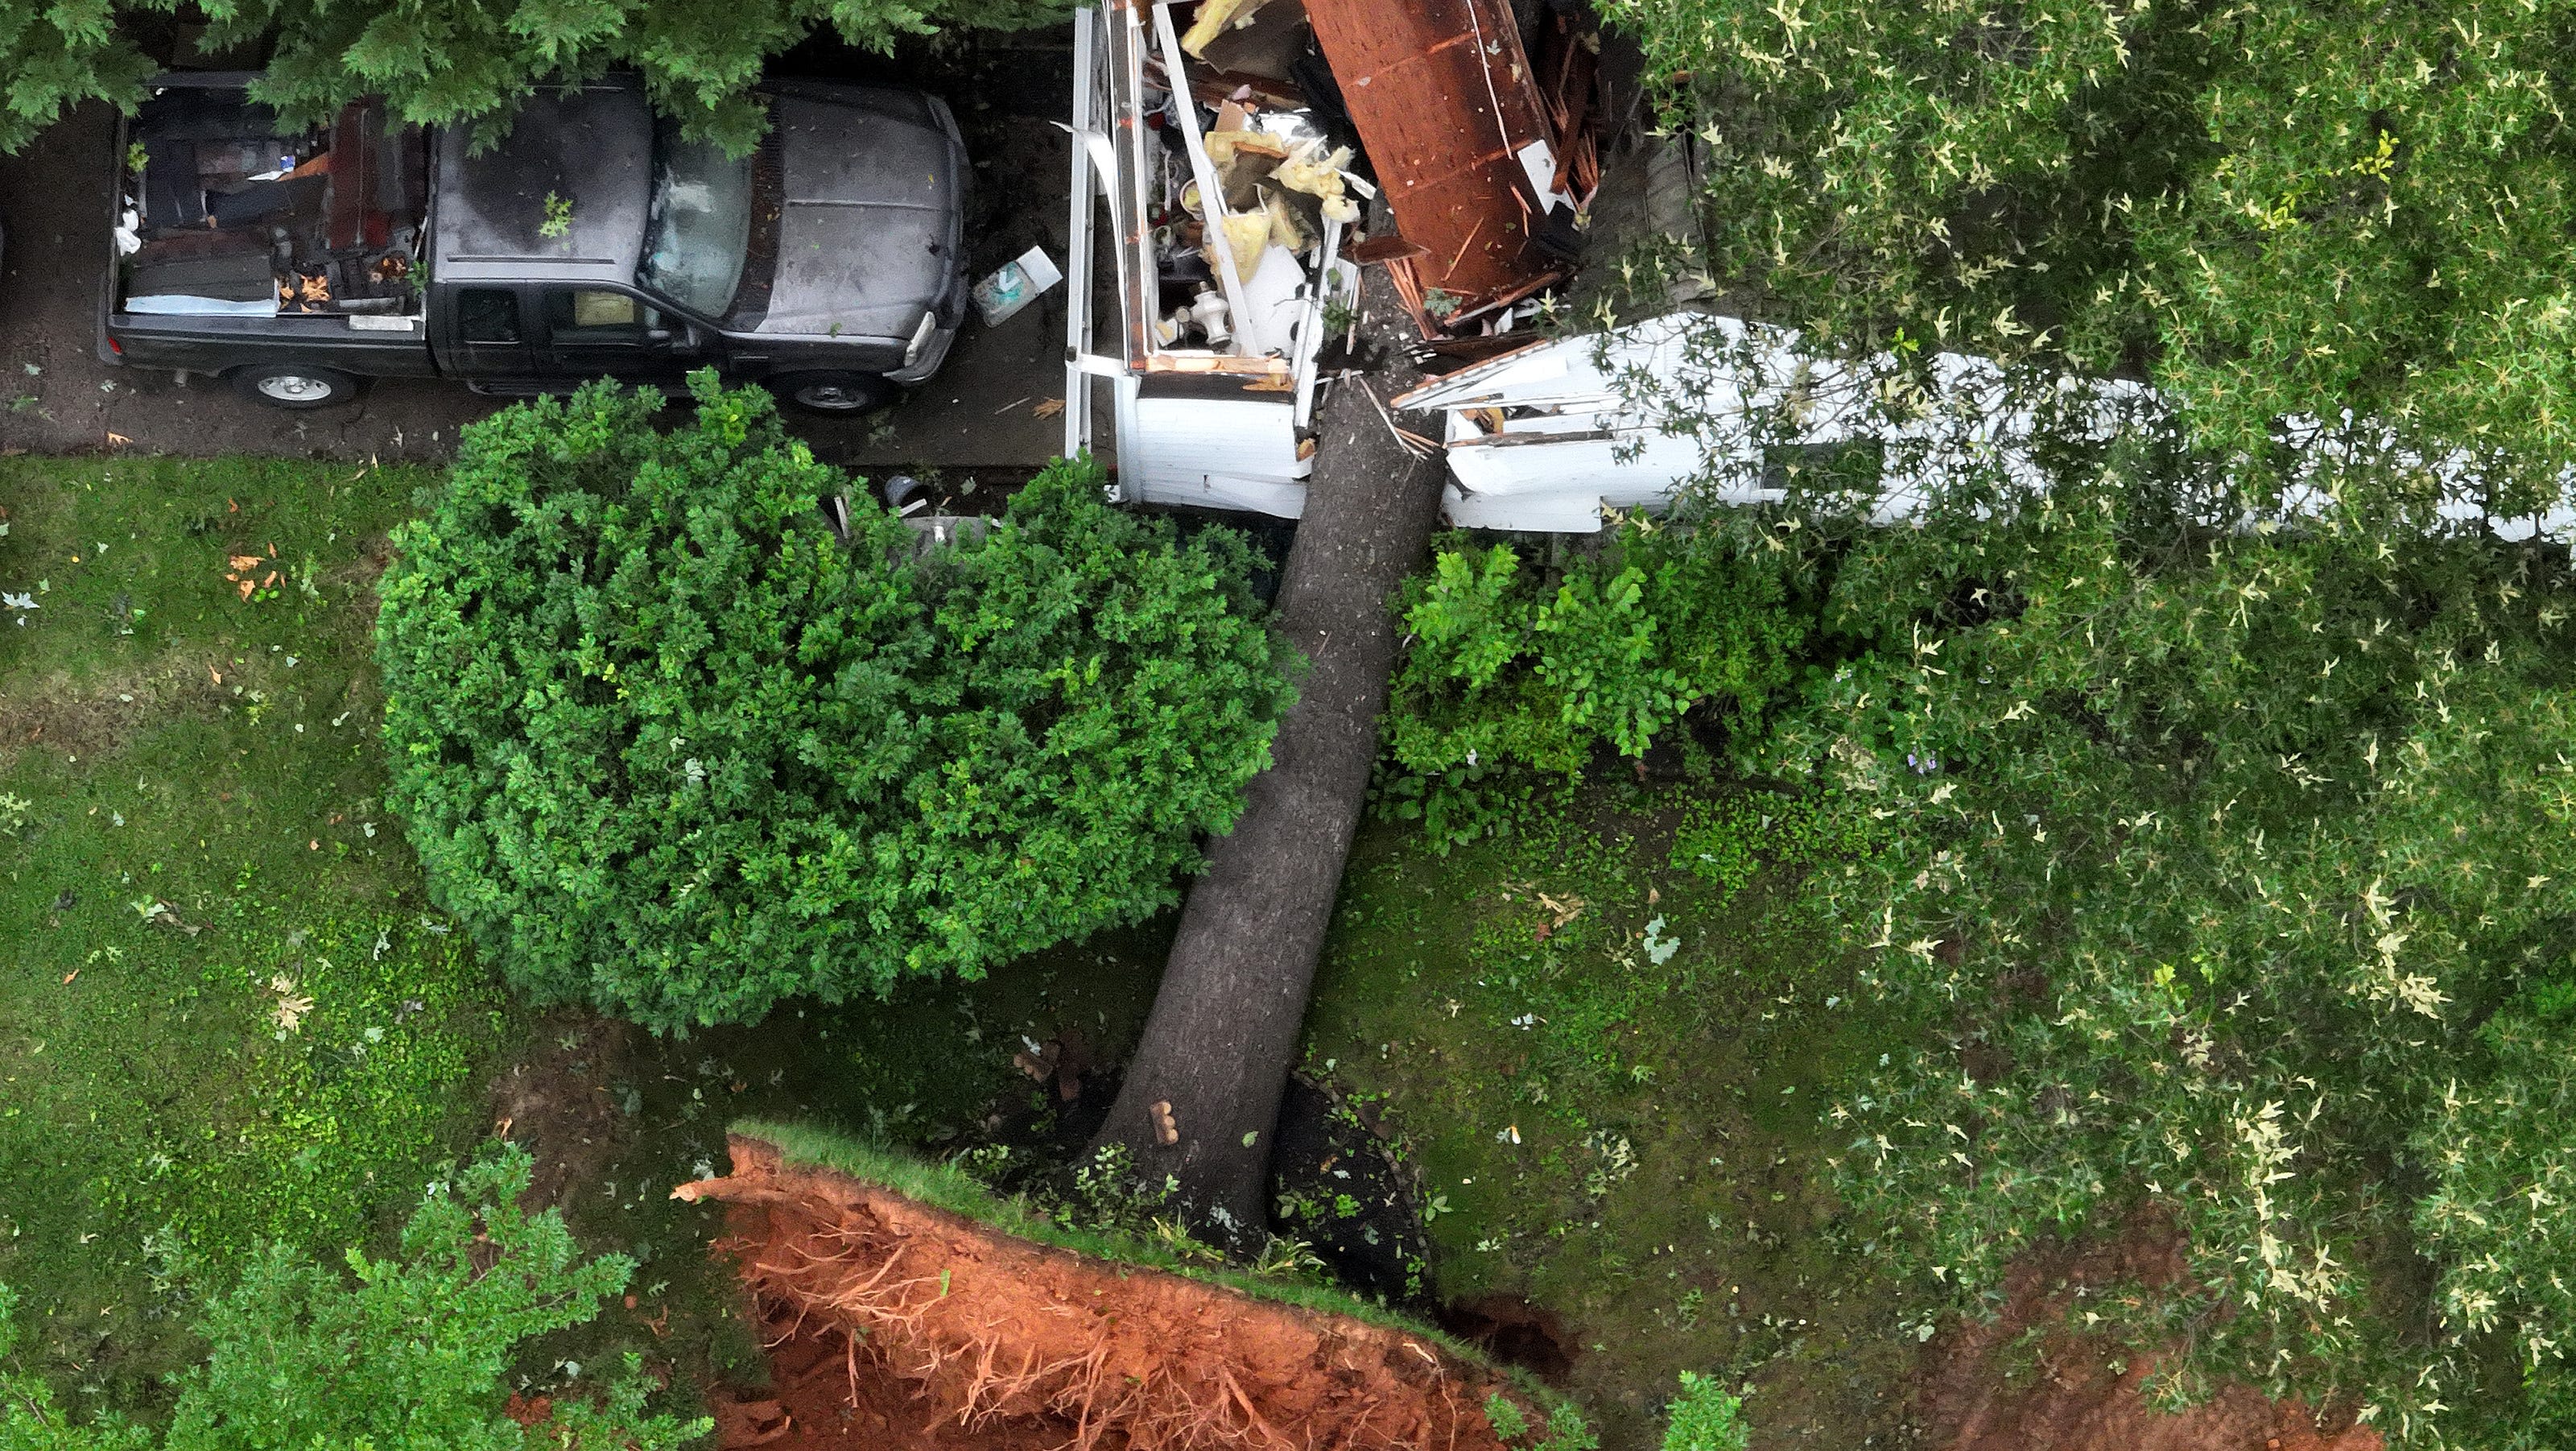 Deadly tornadoes in Maryland, Michigan, Ohio cause damage: See videos, photos of aftermath